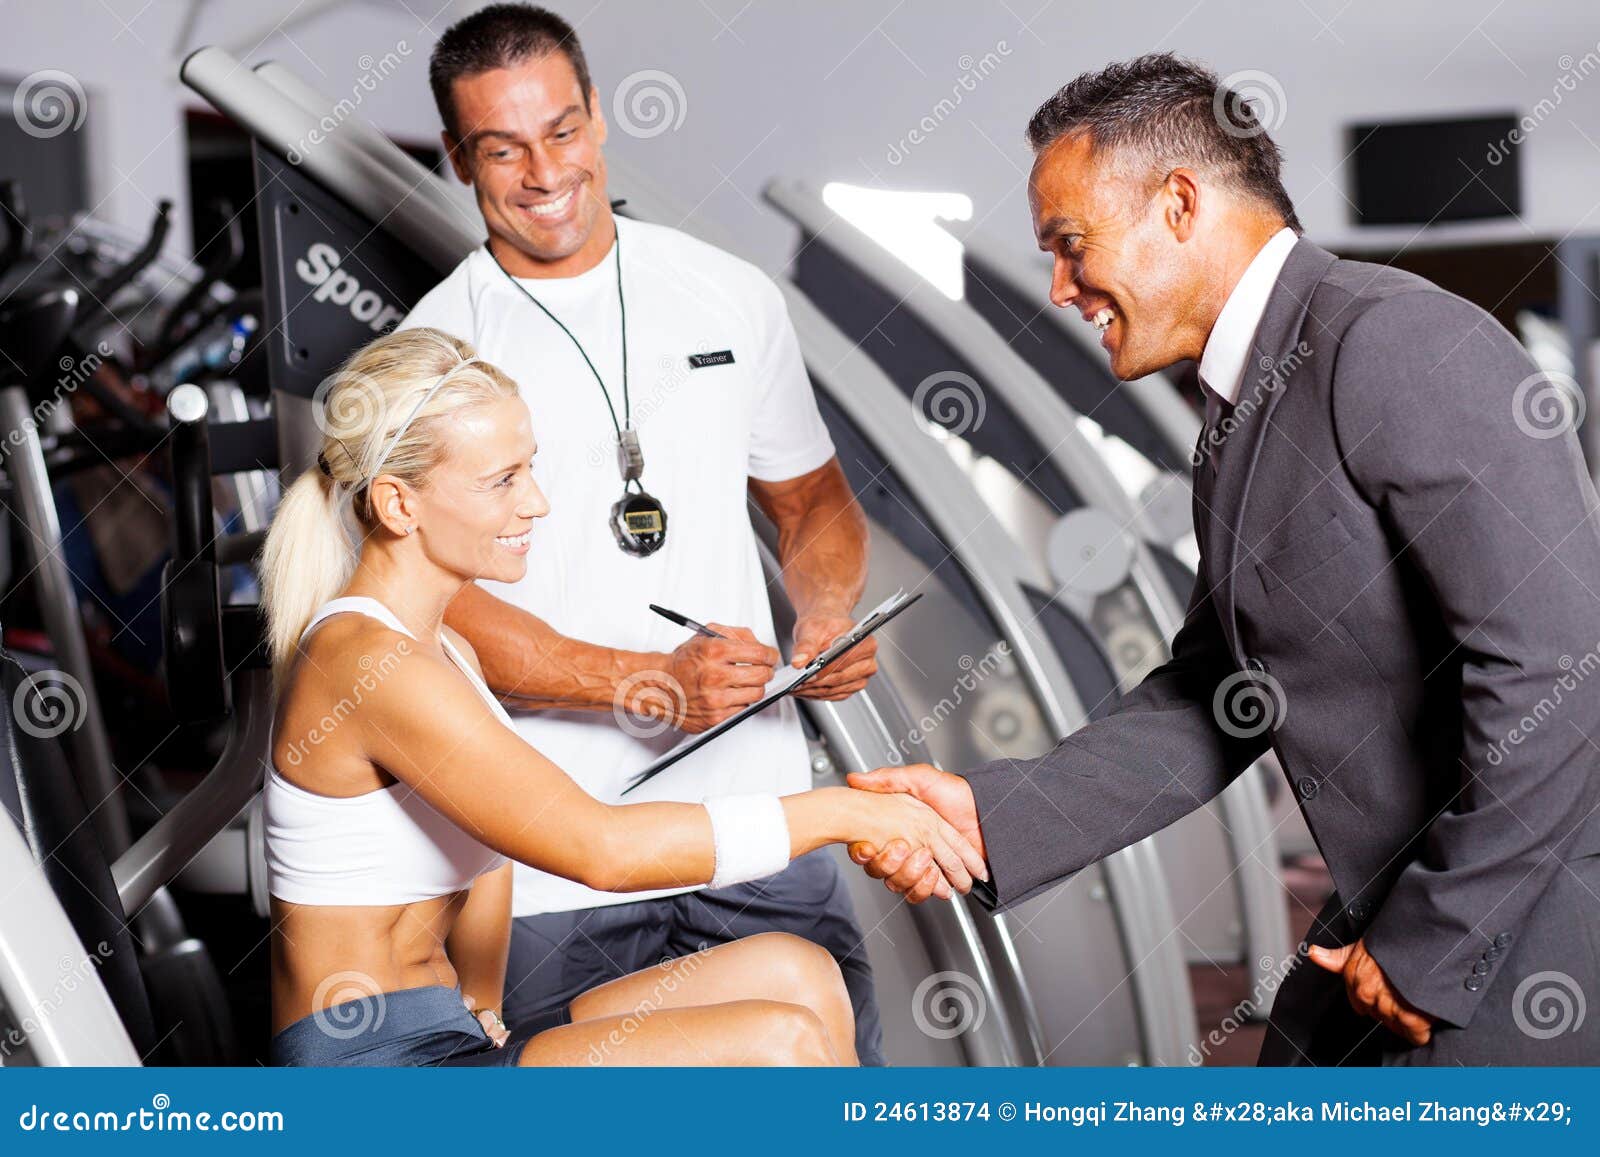 Gym Manager Greeting Customer Stock Photo - Image of care